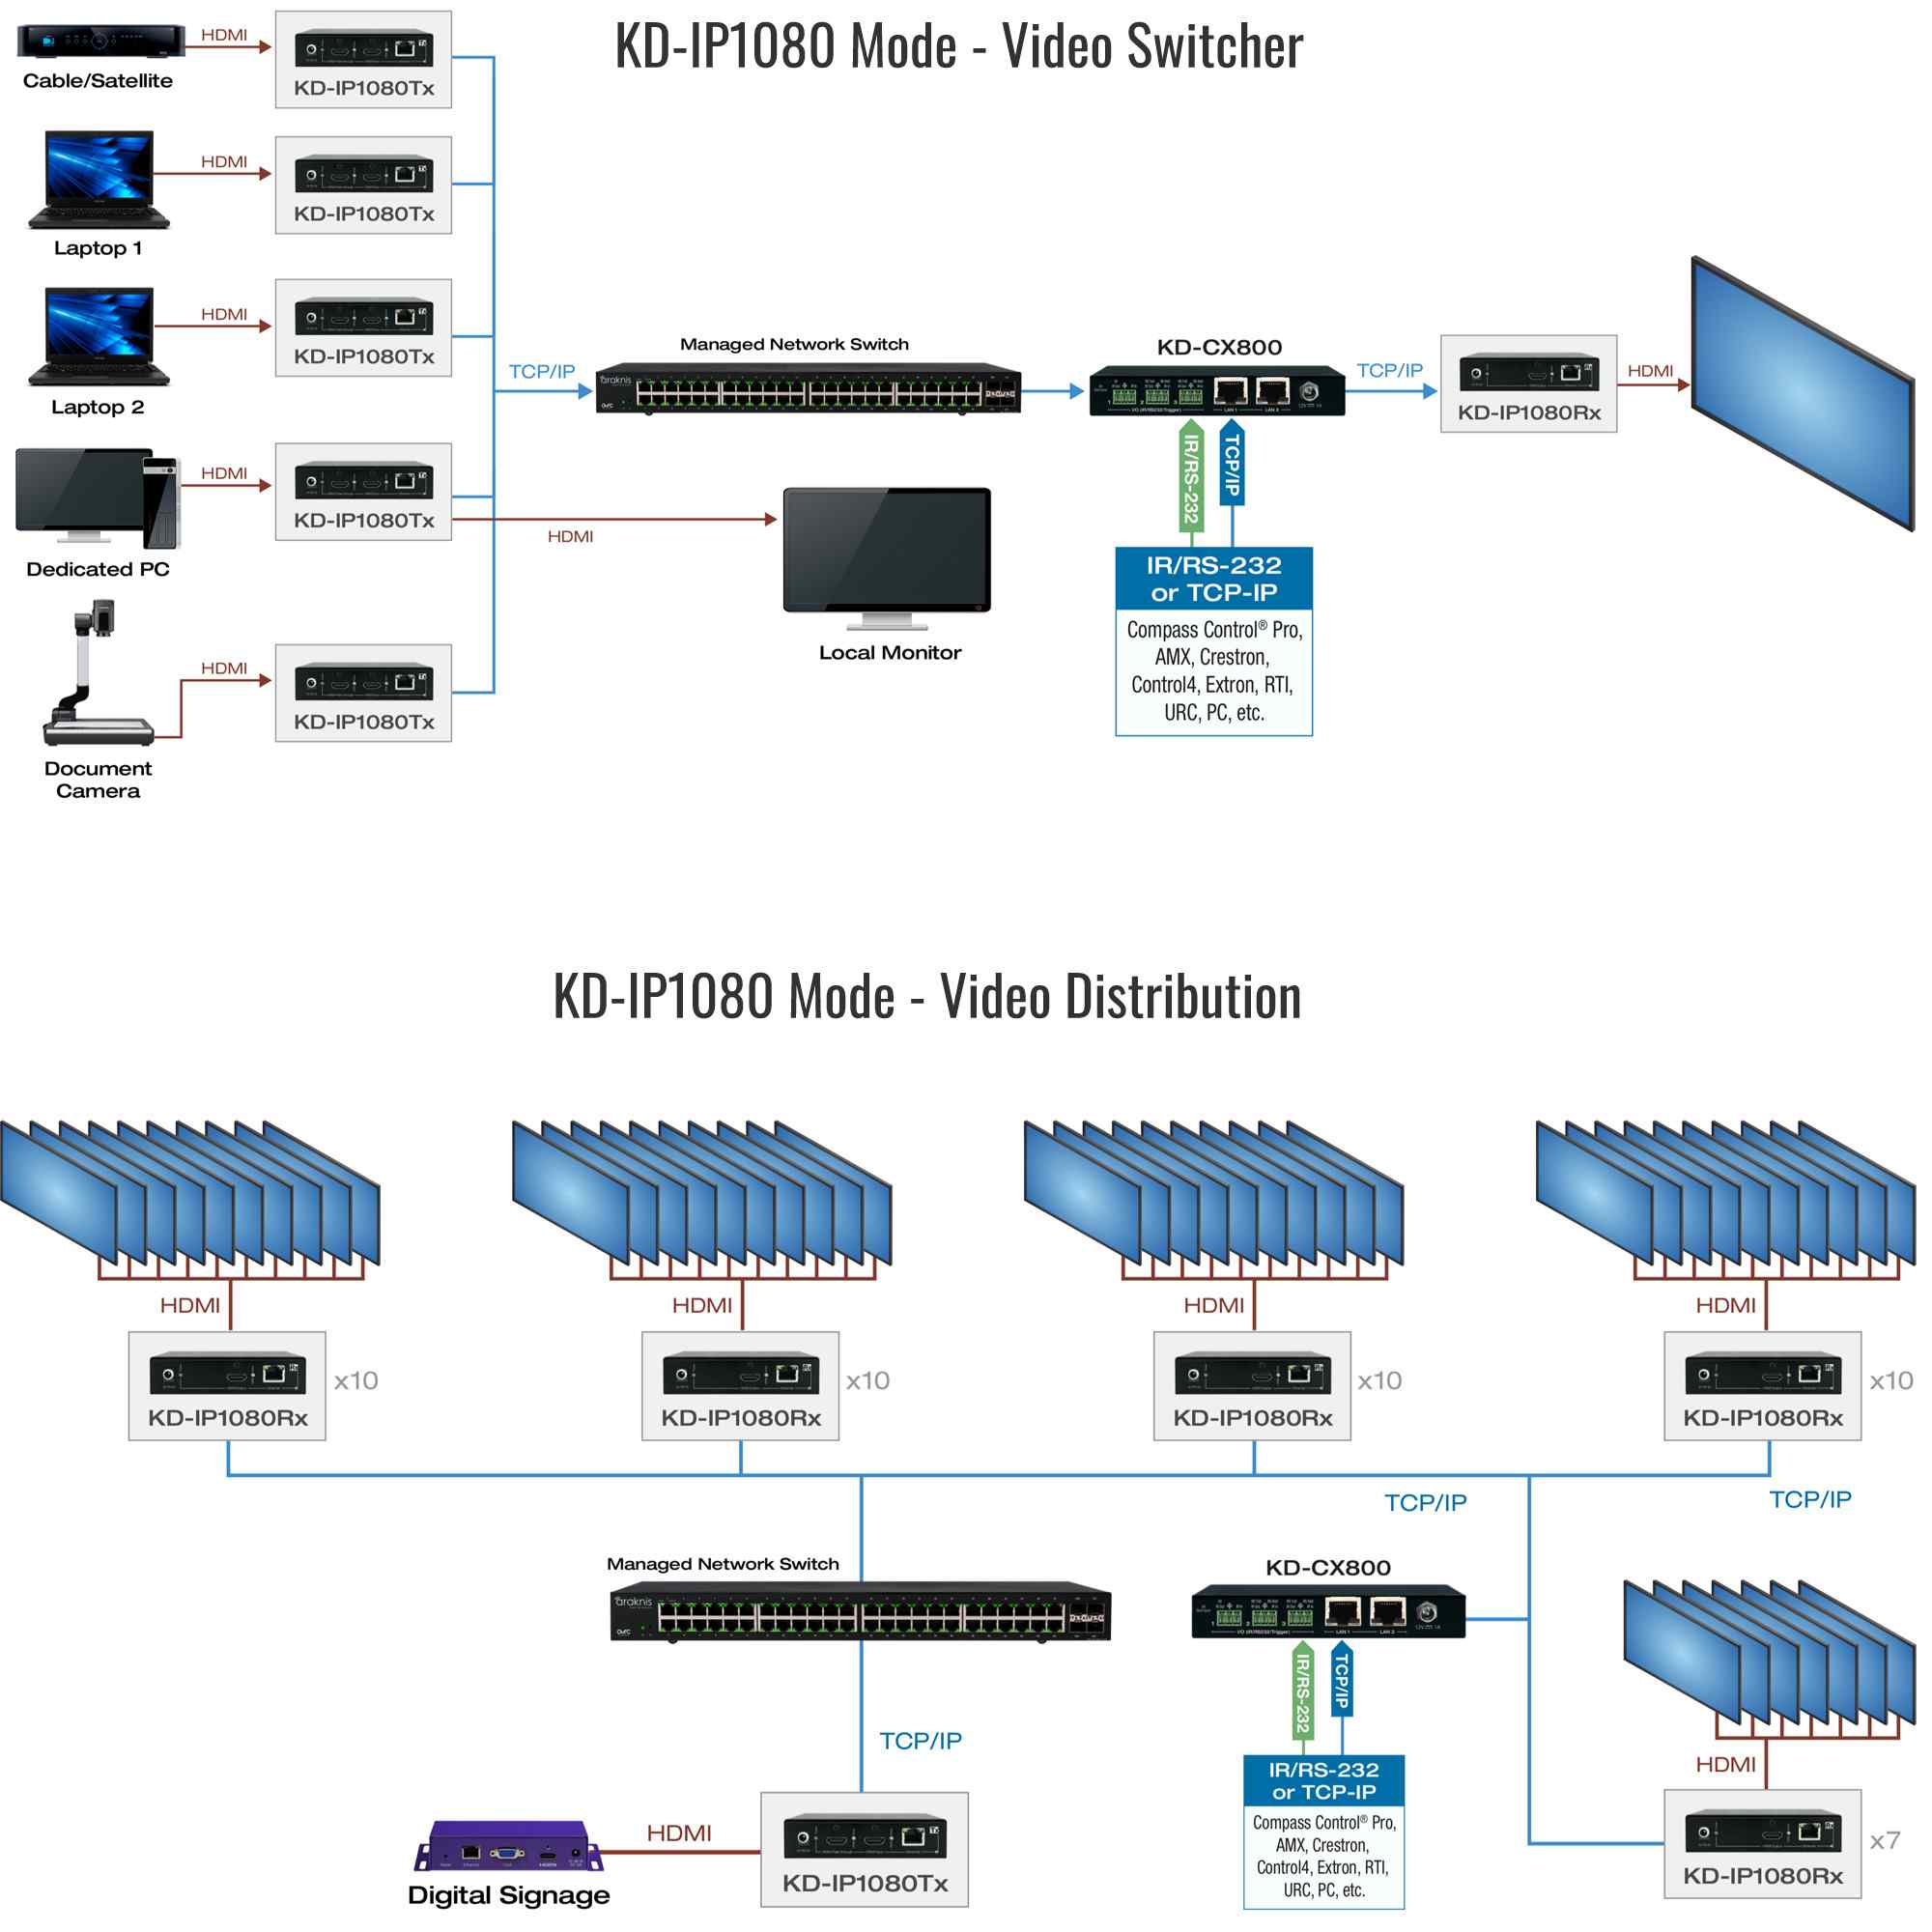 Thumbnail of Example Diagram showing the video switch and distribution mode of HDMI transmitters